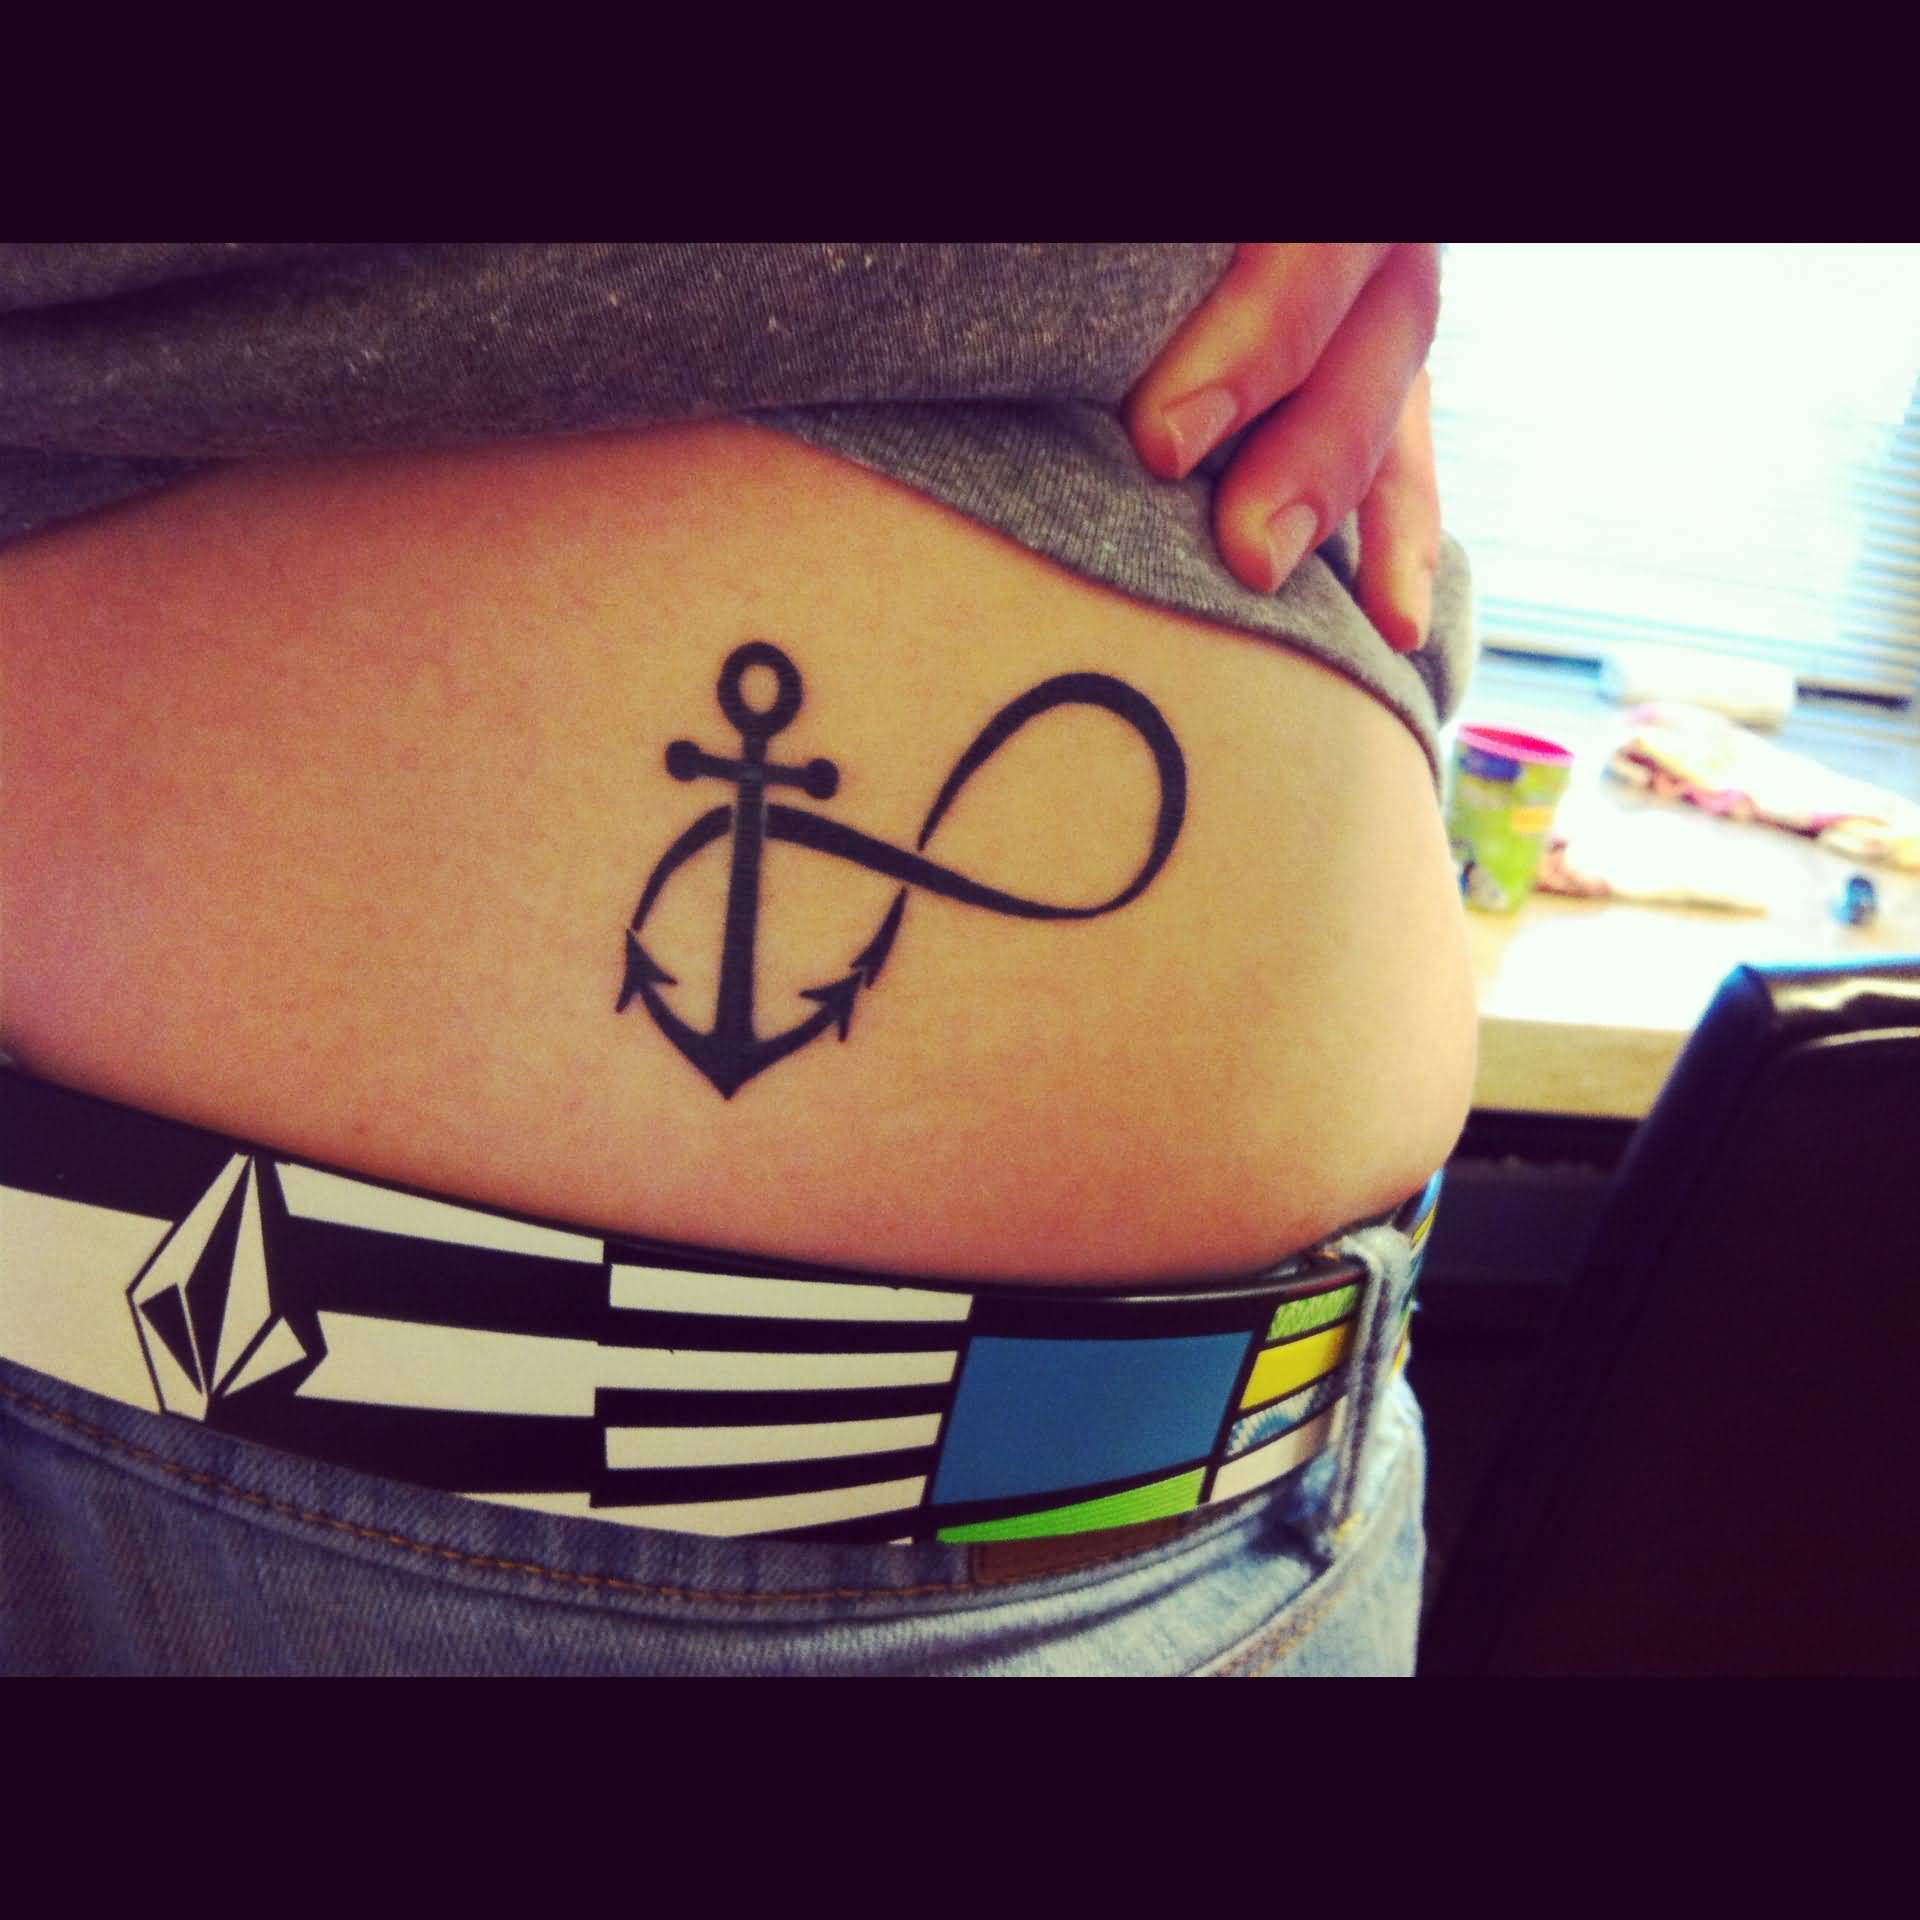 Black Ink Infinity With Anchor Tattoo On Lower Back